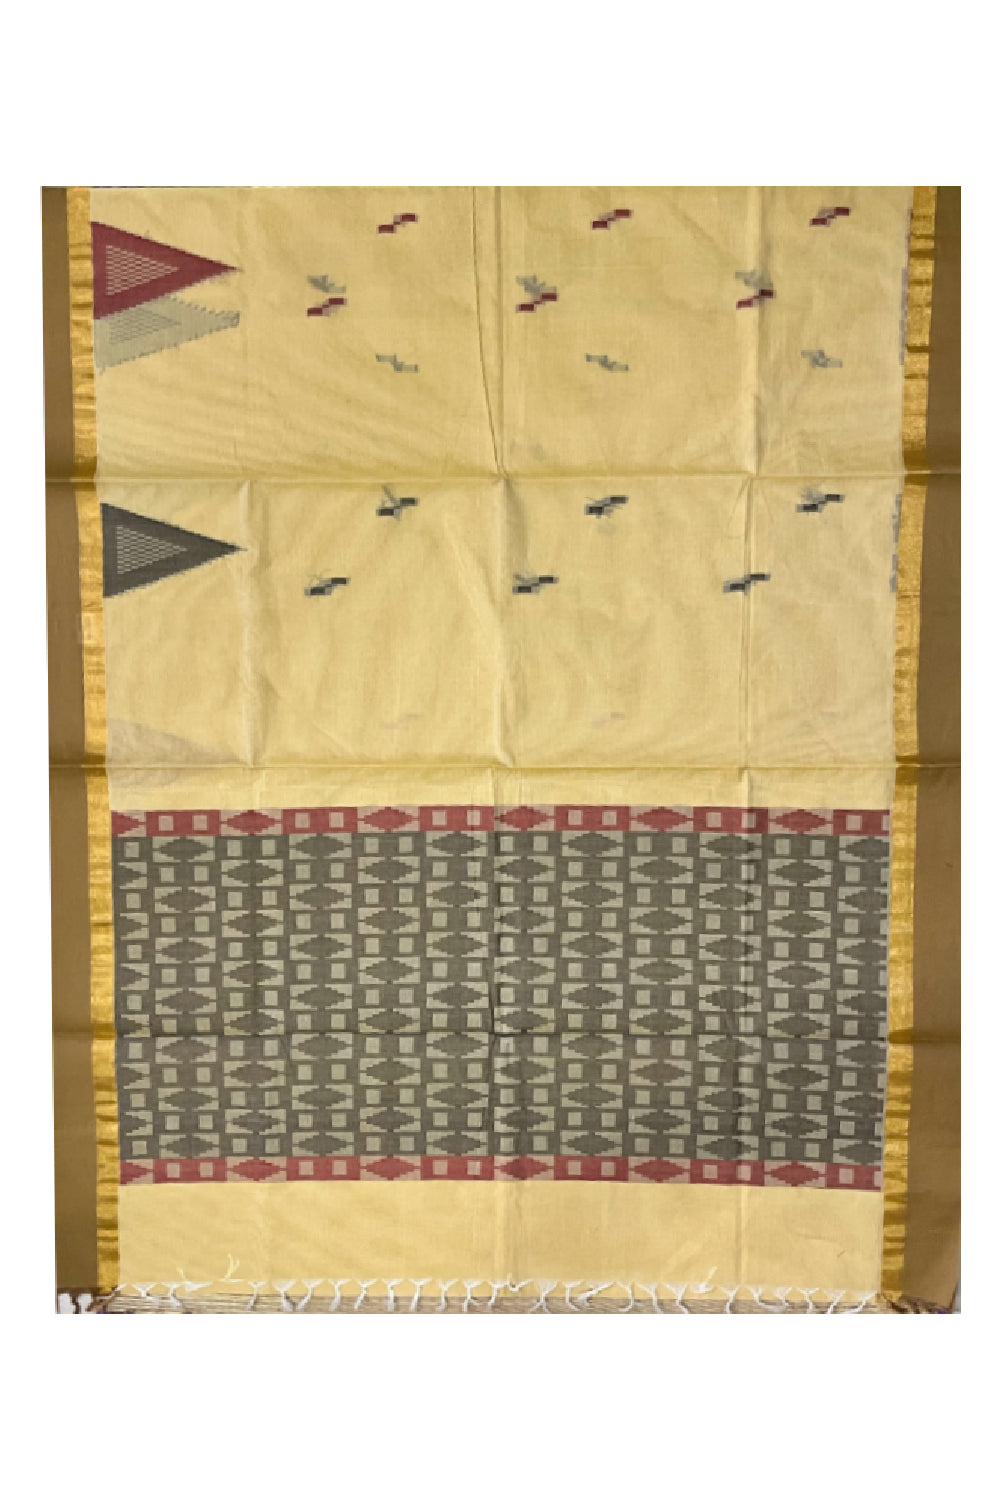 Southloom Light Brown Cotton Saree with Woven Designs